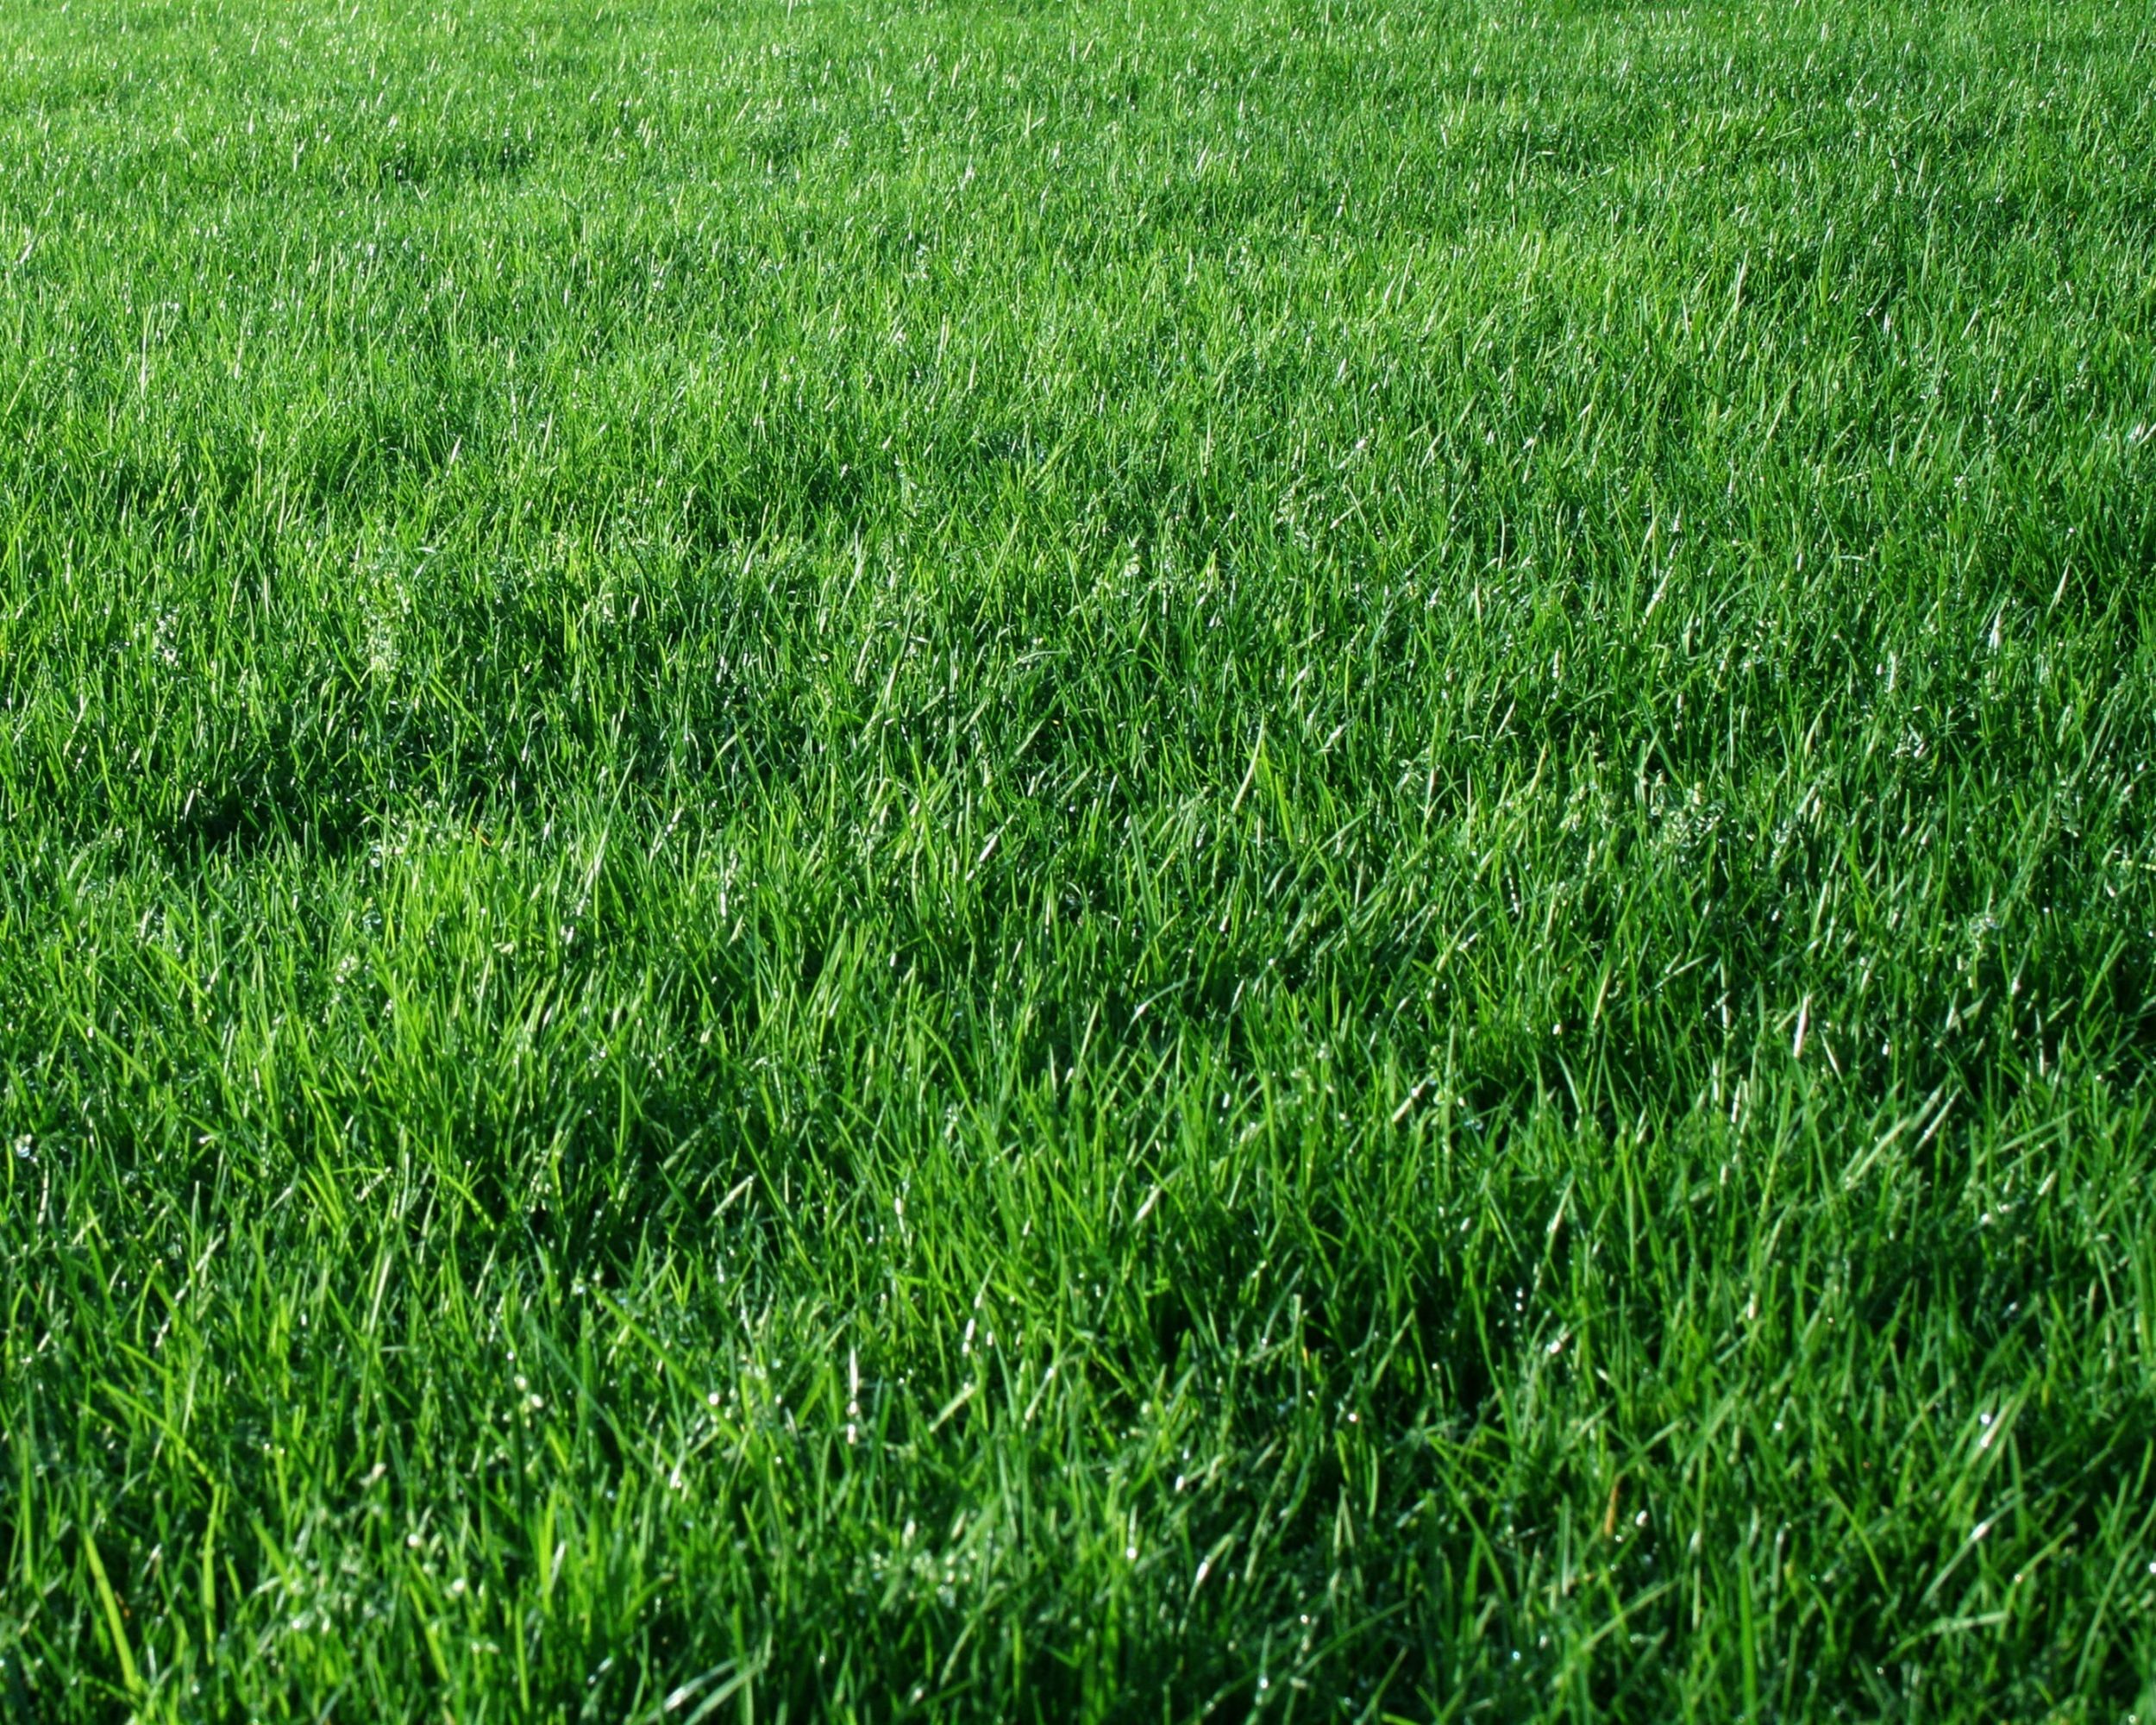 Green Grass Background Quality Image